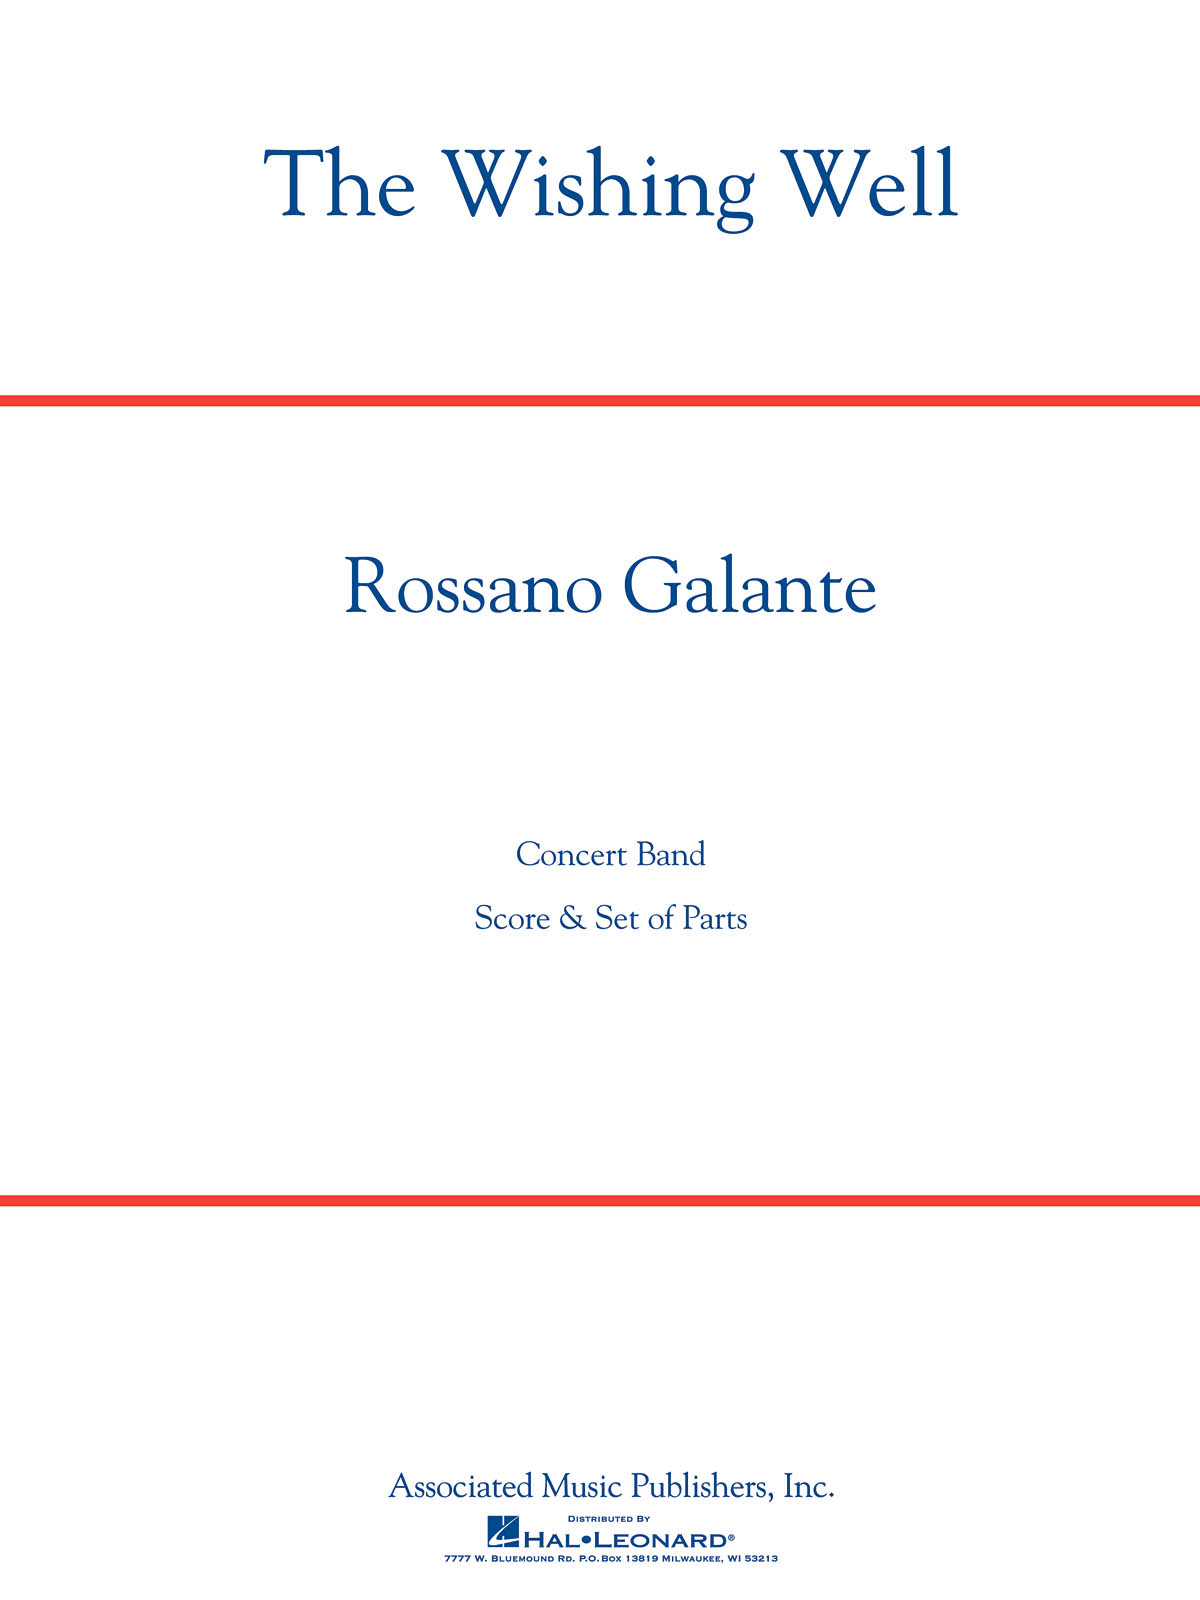 Rossano Galante: The Wishing Well: Concert Band: Score & Parts